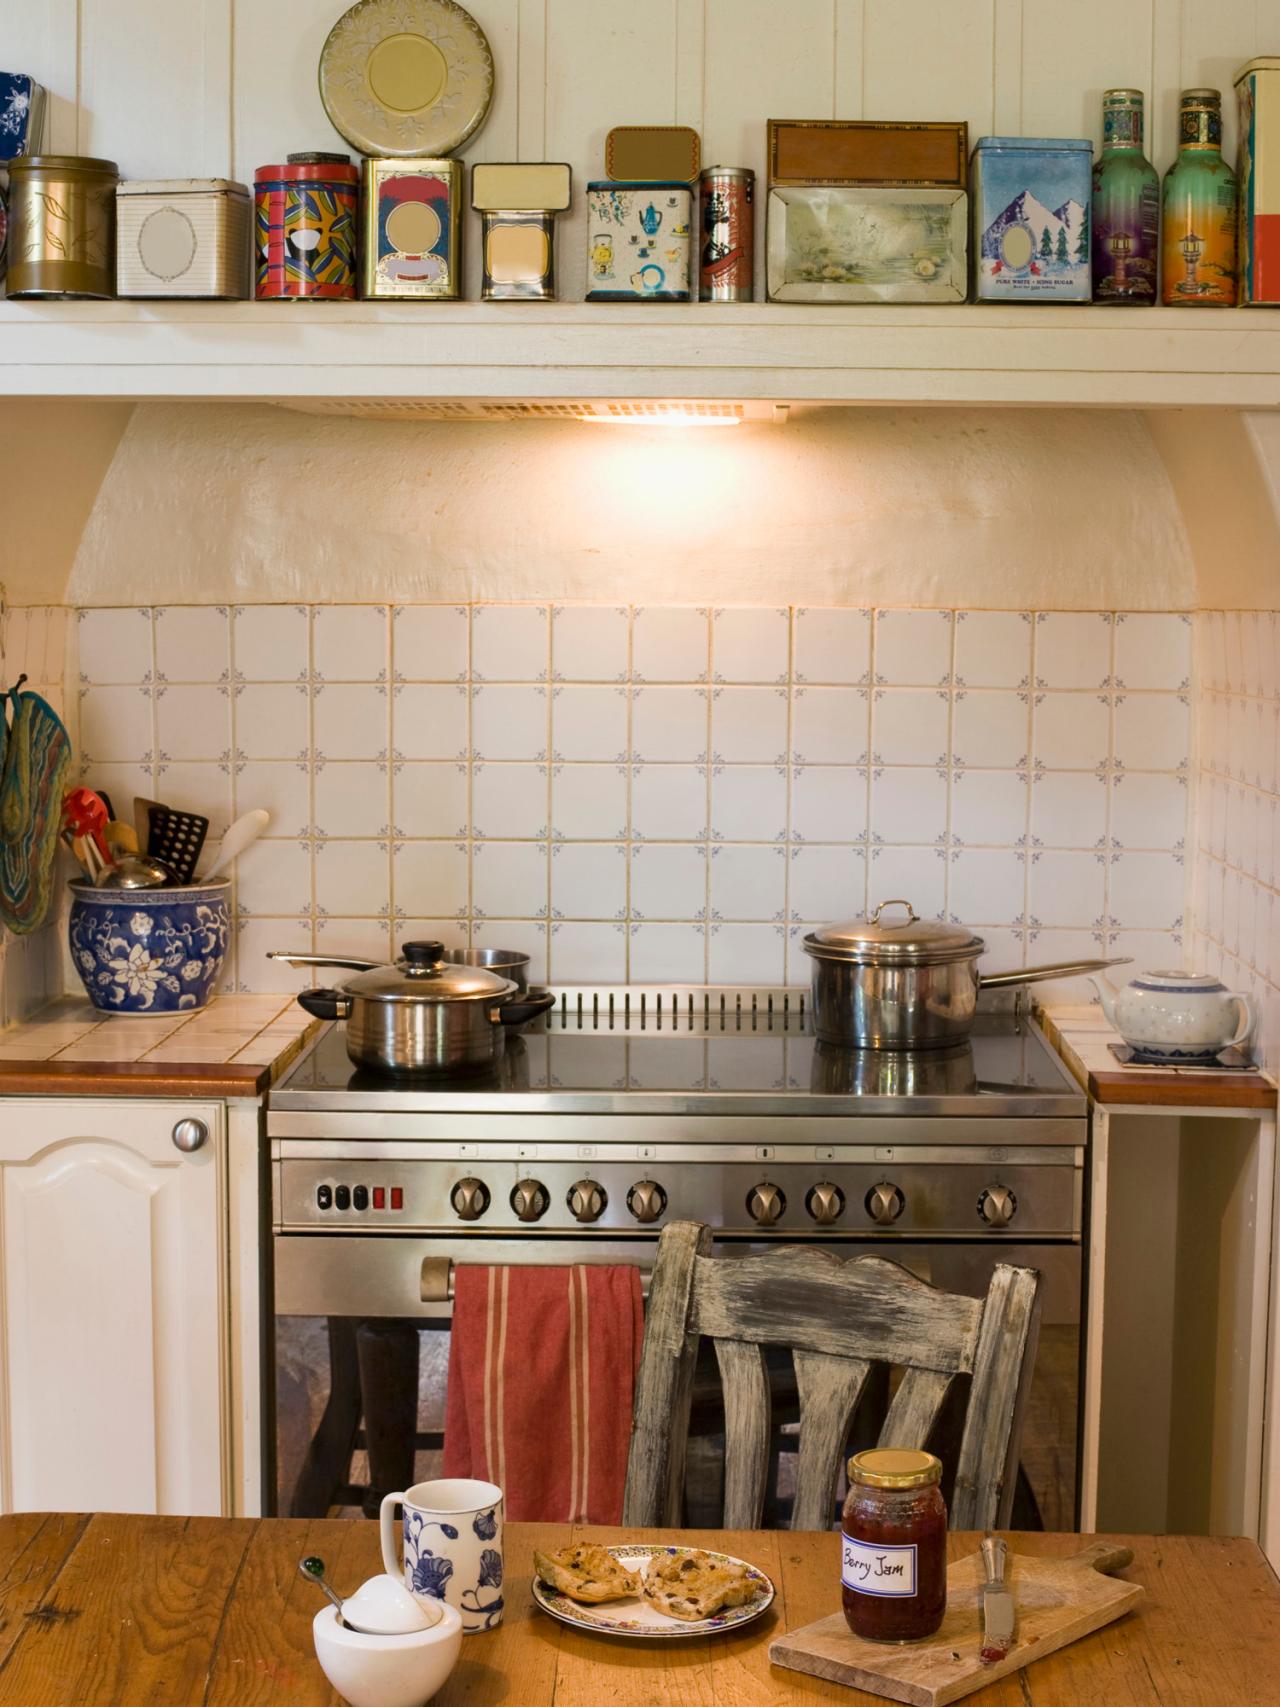 How To Best Light Your Kitchen, What Type Of Lighting Is Best For A Kitchen